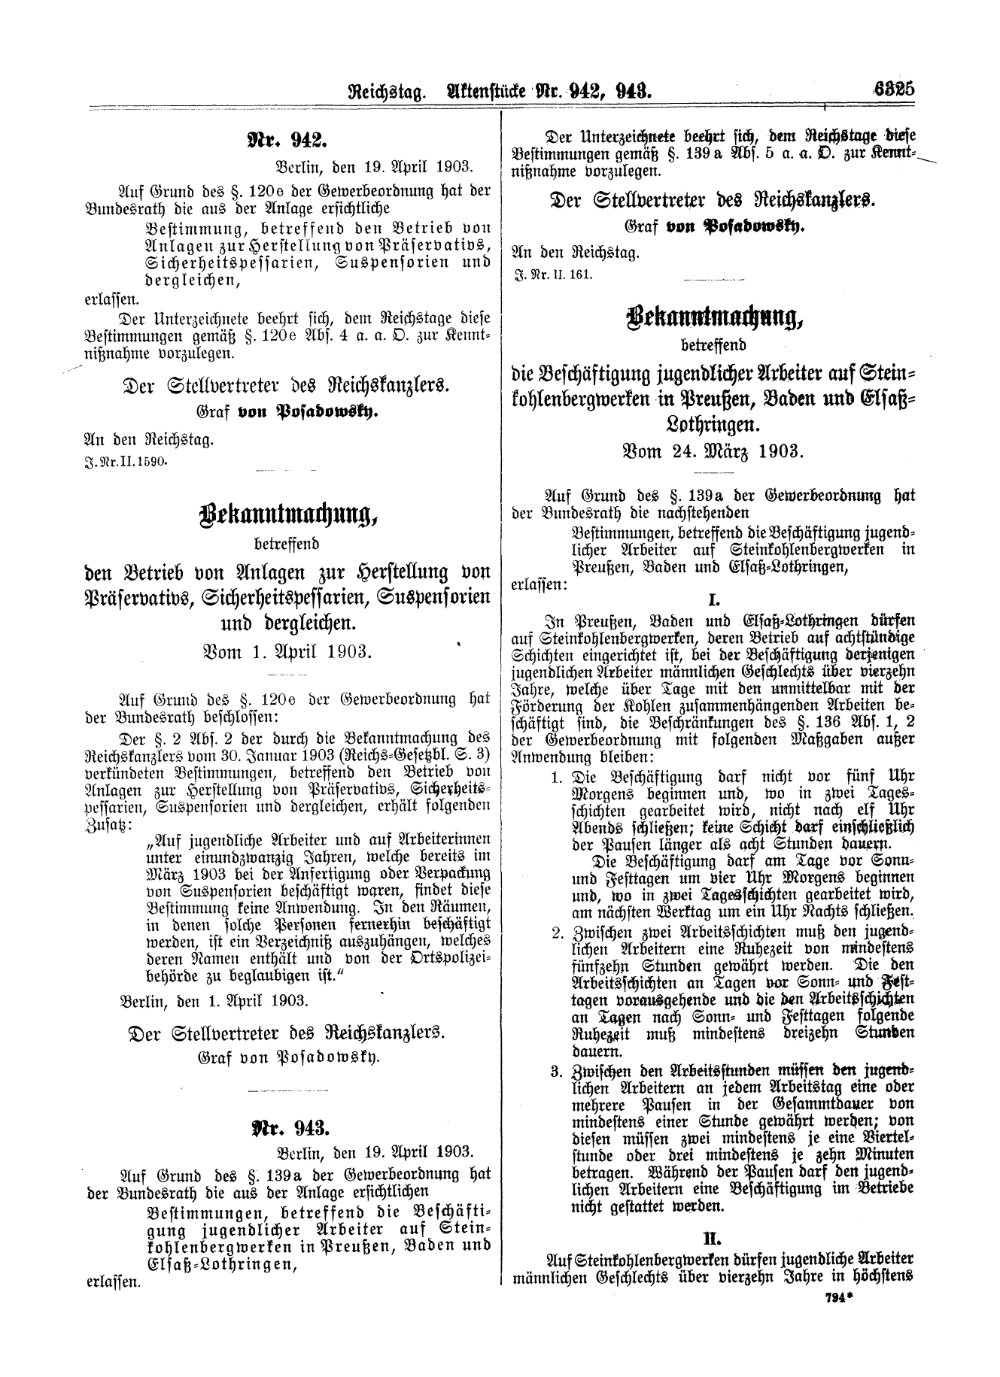 Scan of page 6325